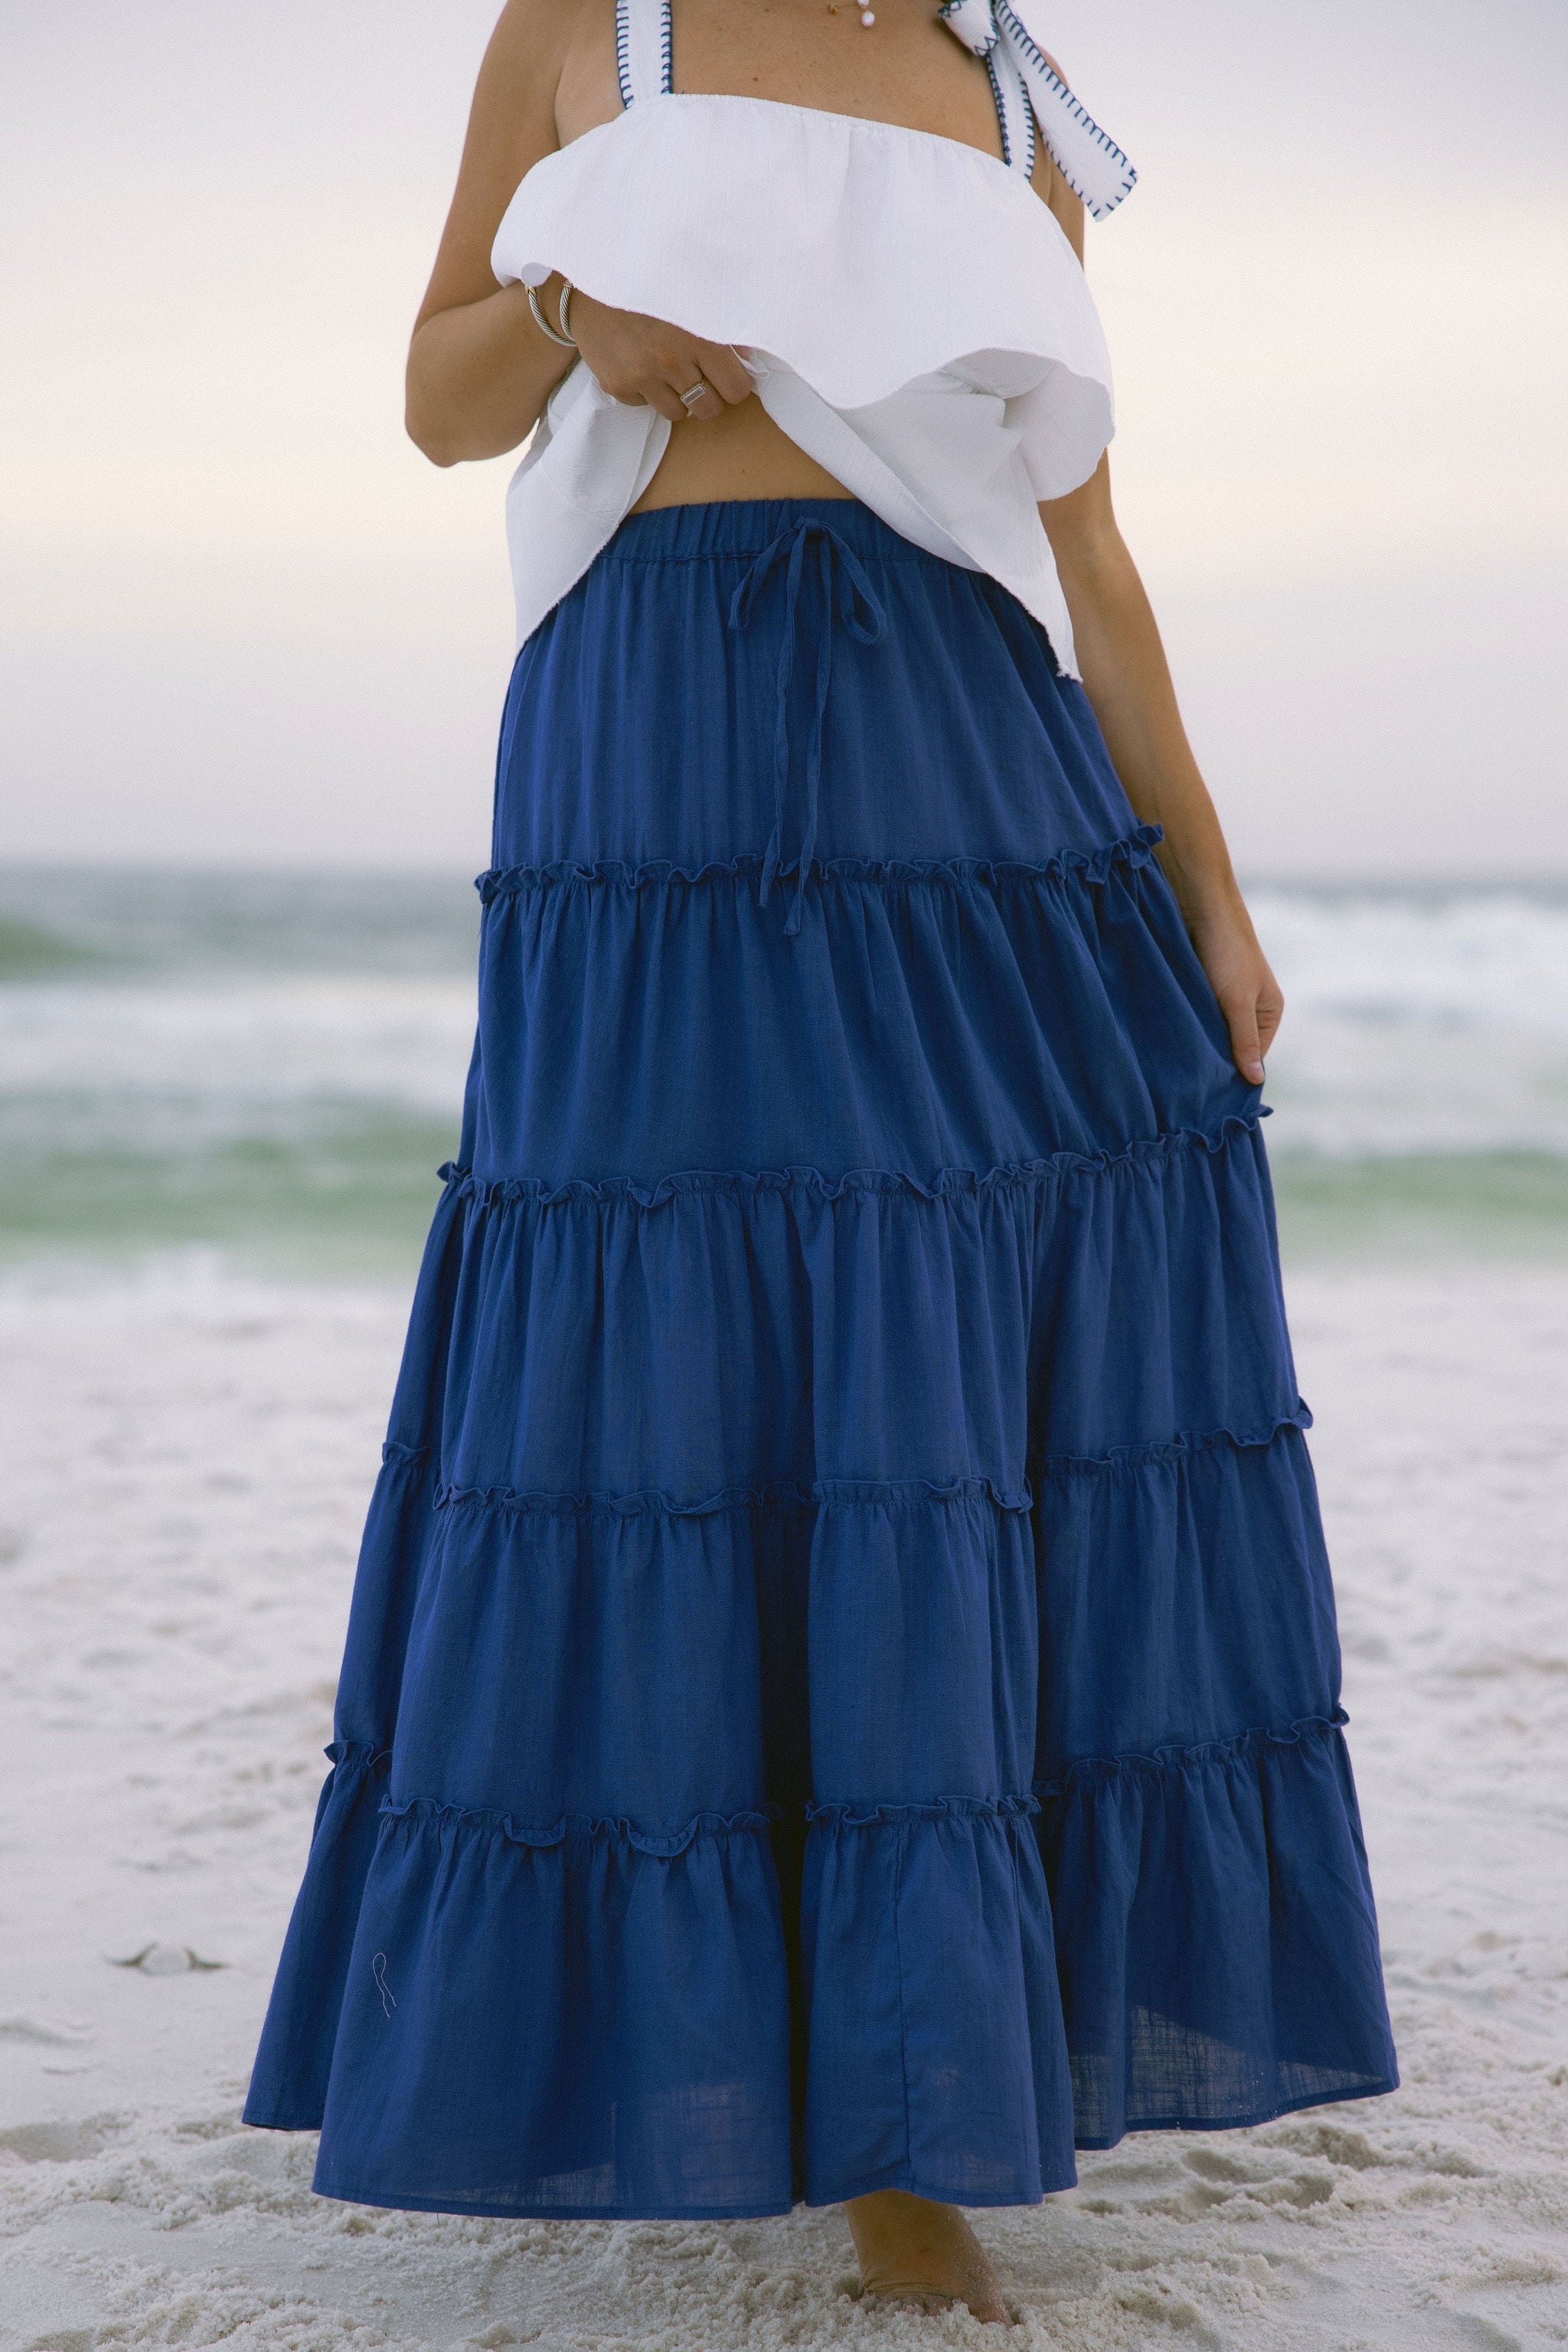 Lower body front view of female model wearing the Danielle Blue Tiered Maxi Skirt that has royal blue fabric, a tiered body, and elastic waist. Worn with white tank top.